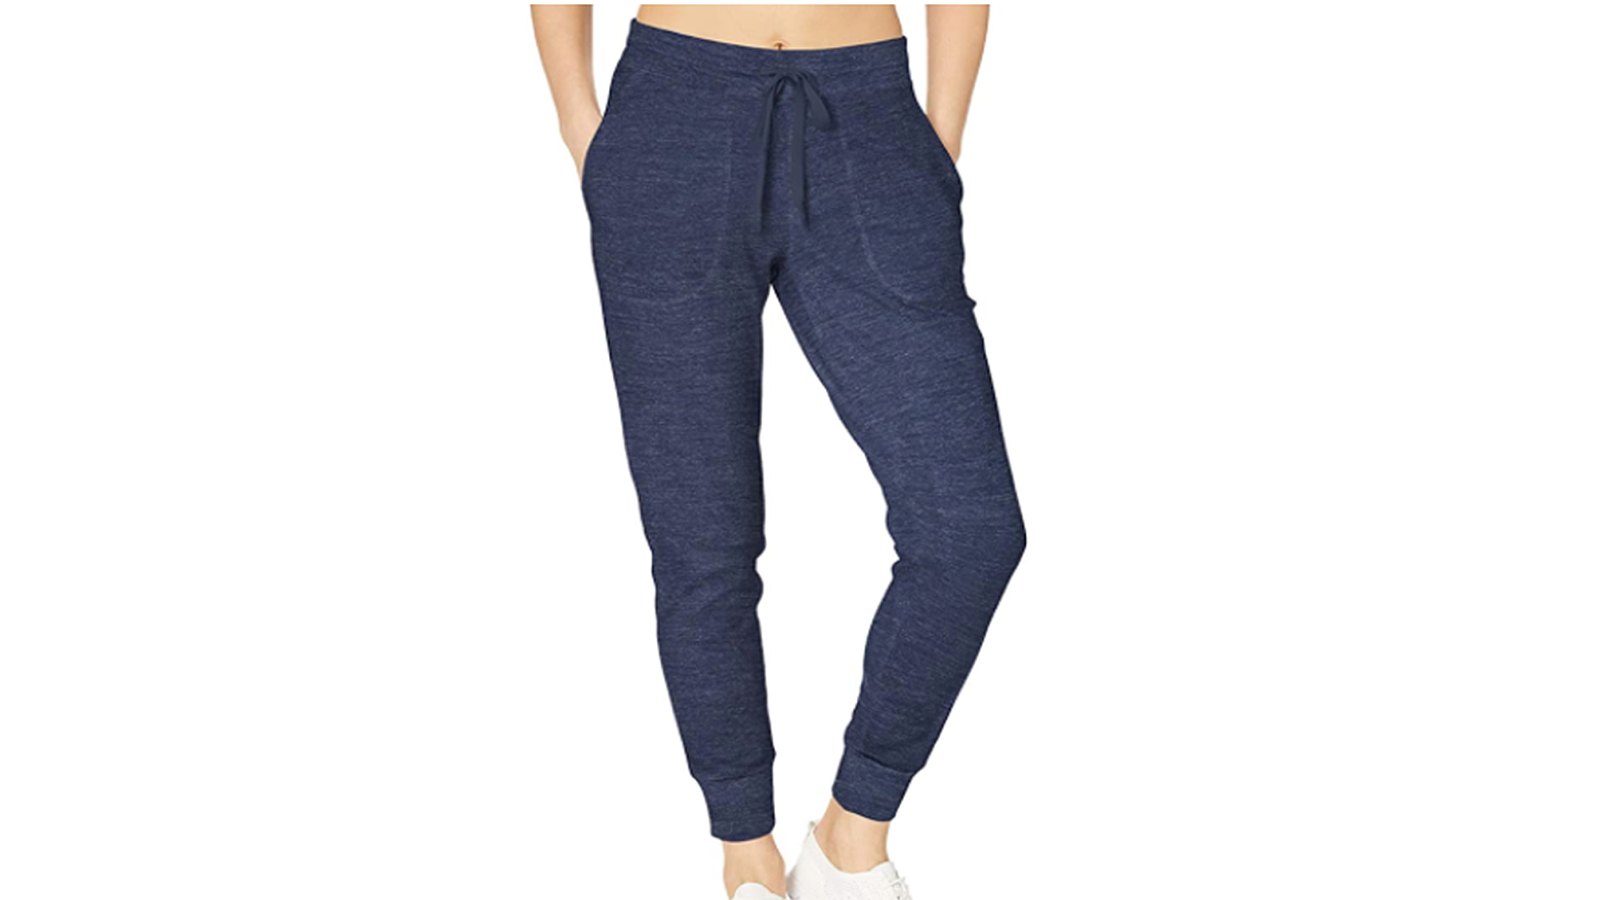 Essentials Joggers Are the Perfect Work-From-Home Pants